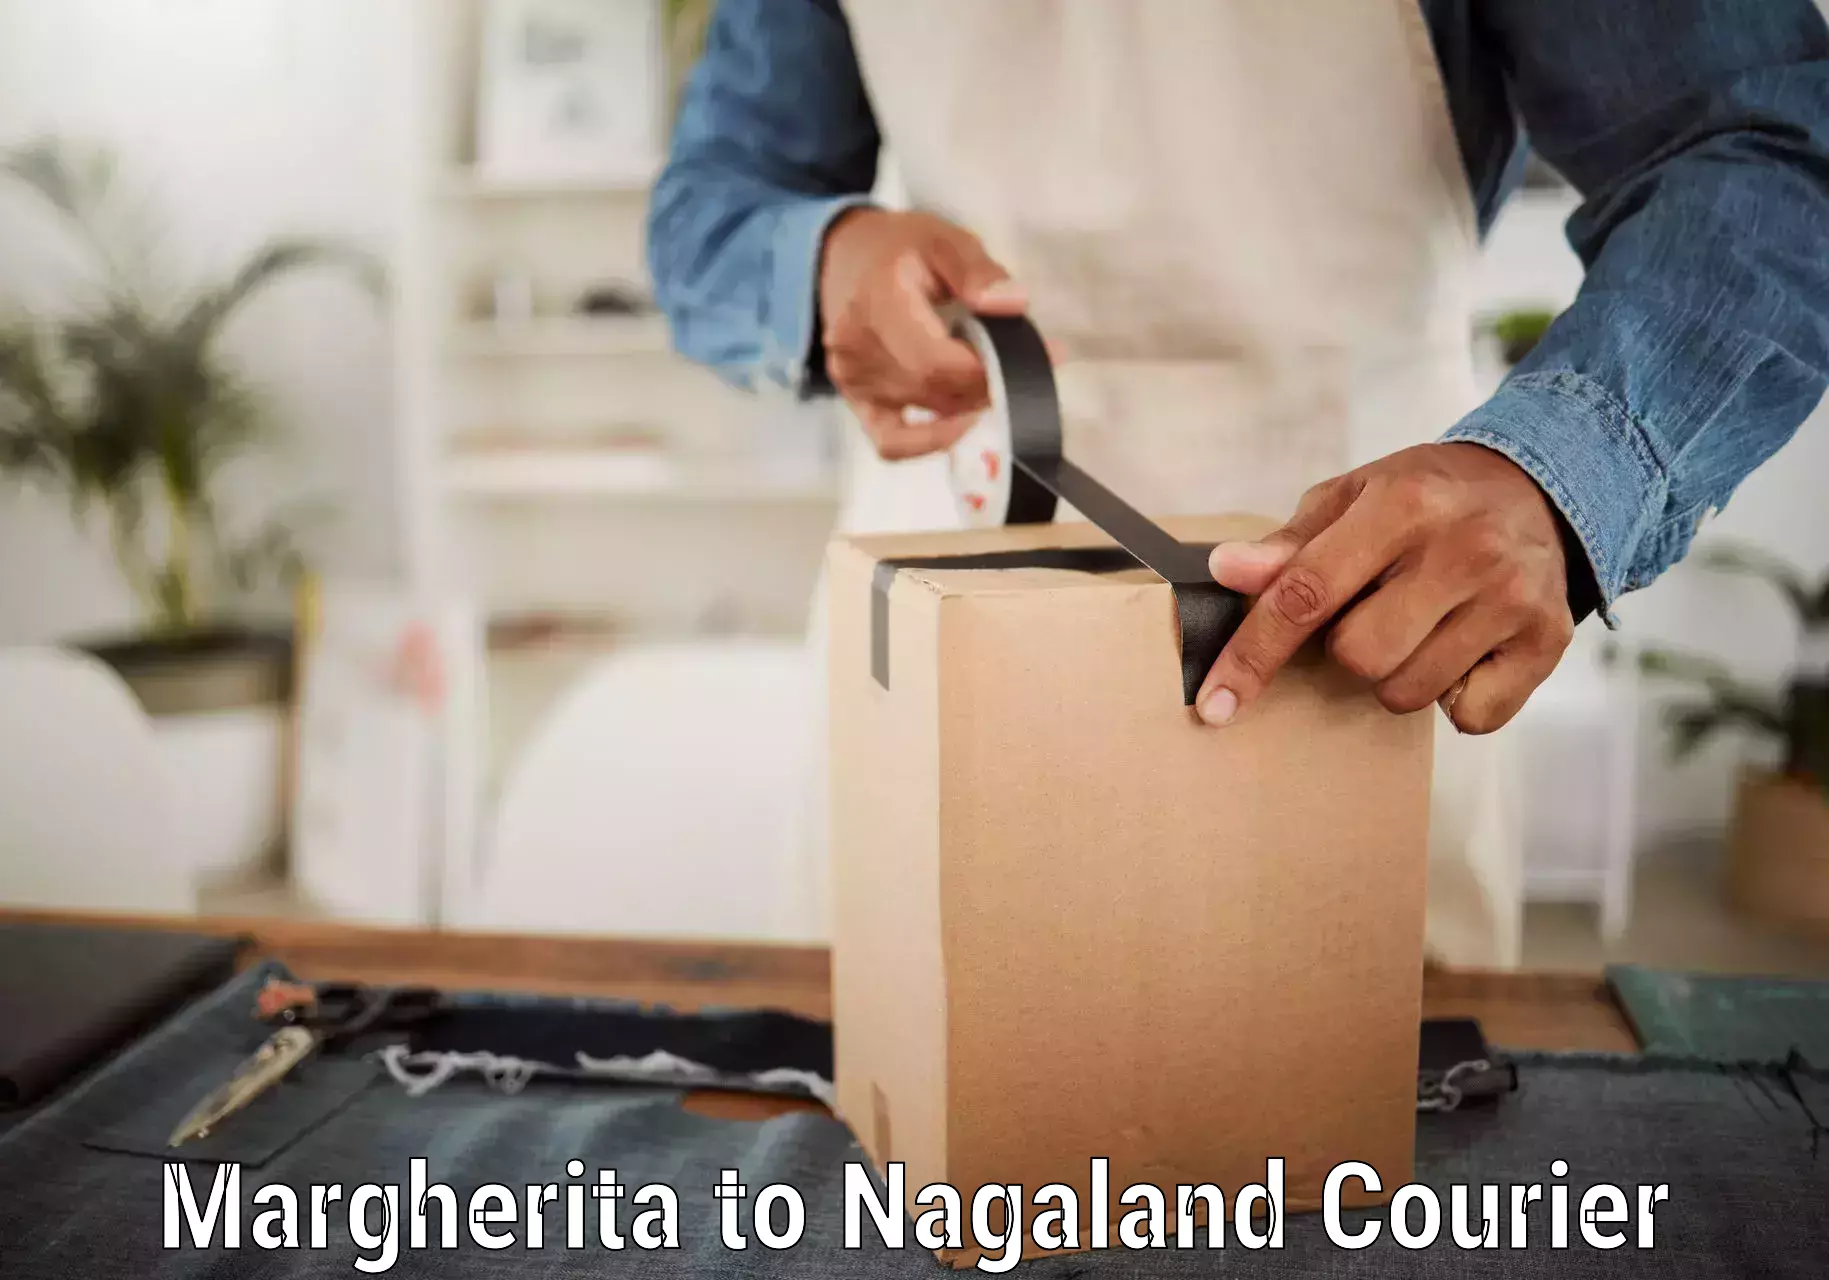 Subscription-based courier Margherita to Nagaland